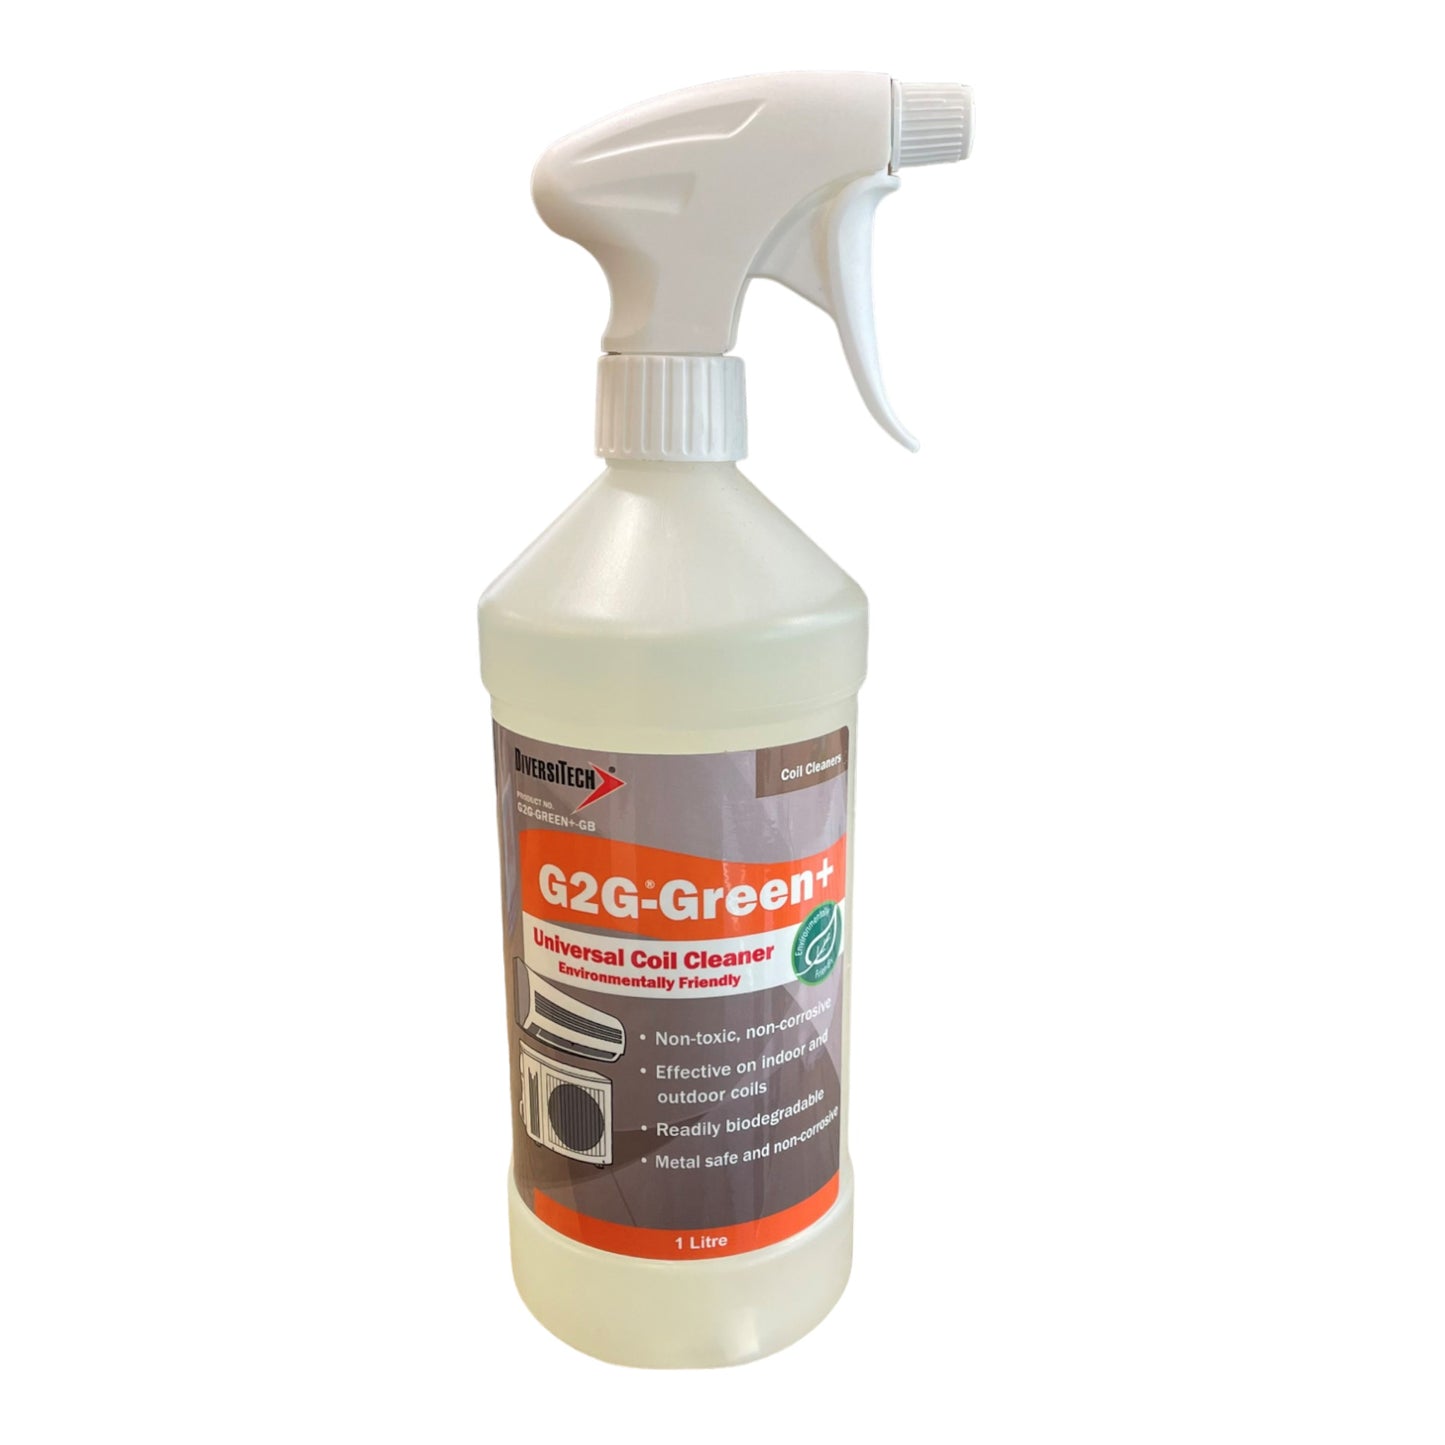 Universal Coil Cleaner G2G-Green+